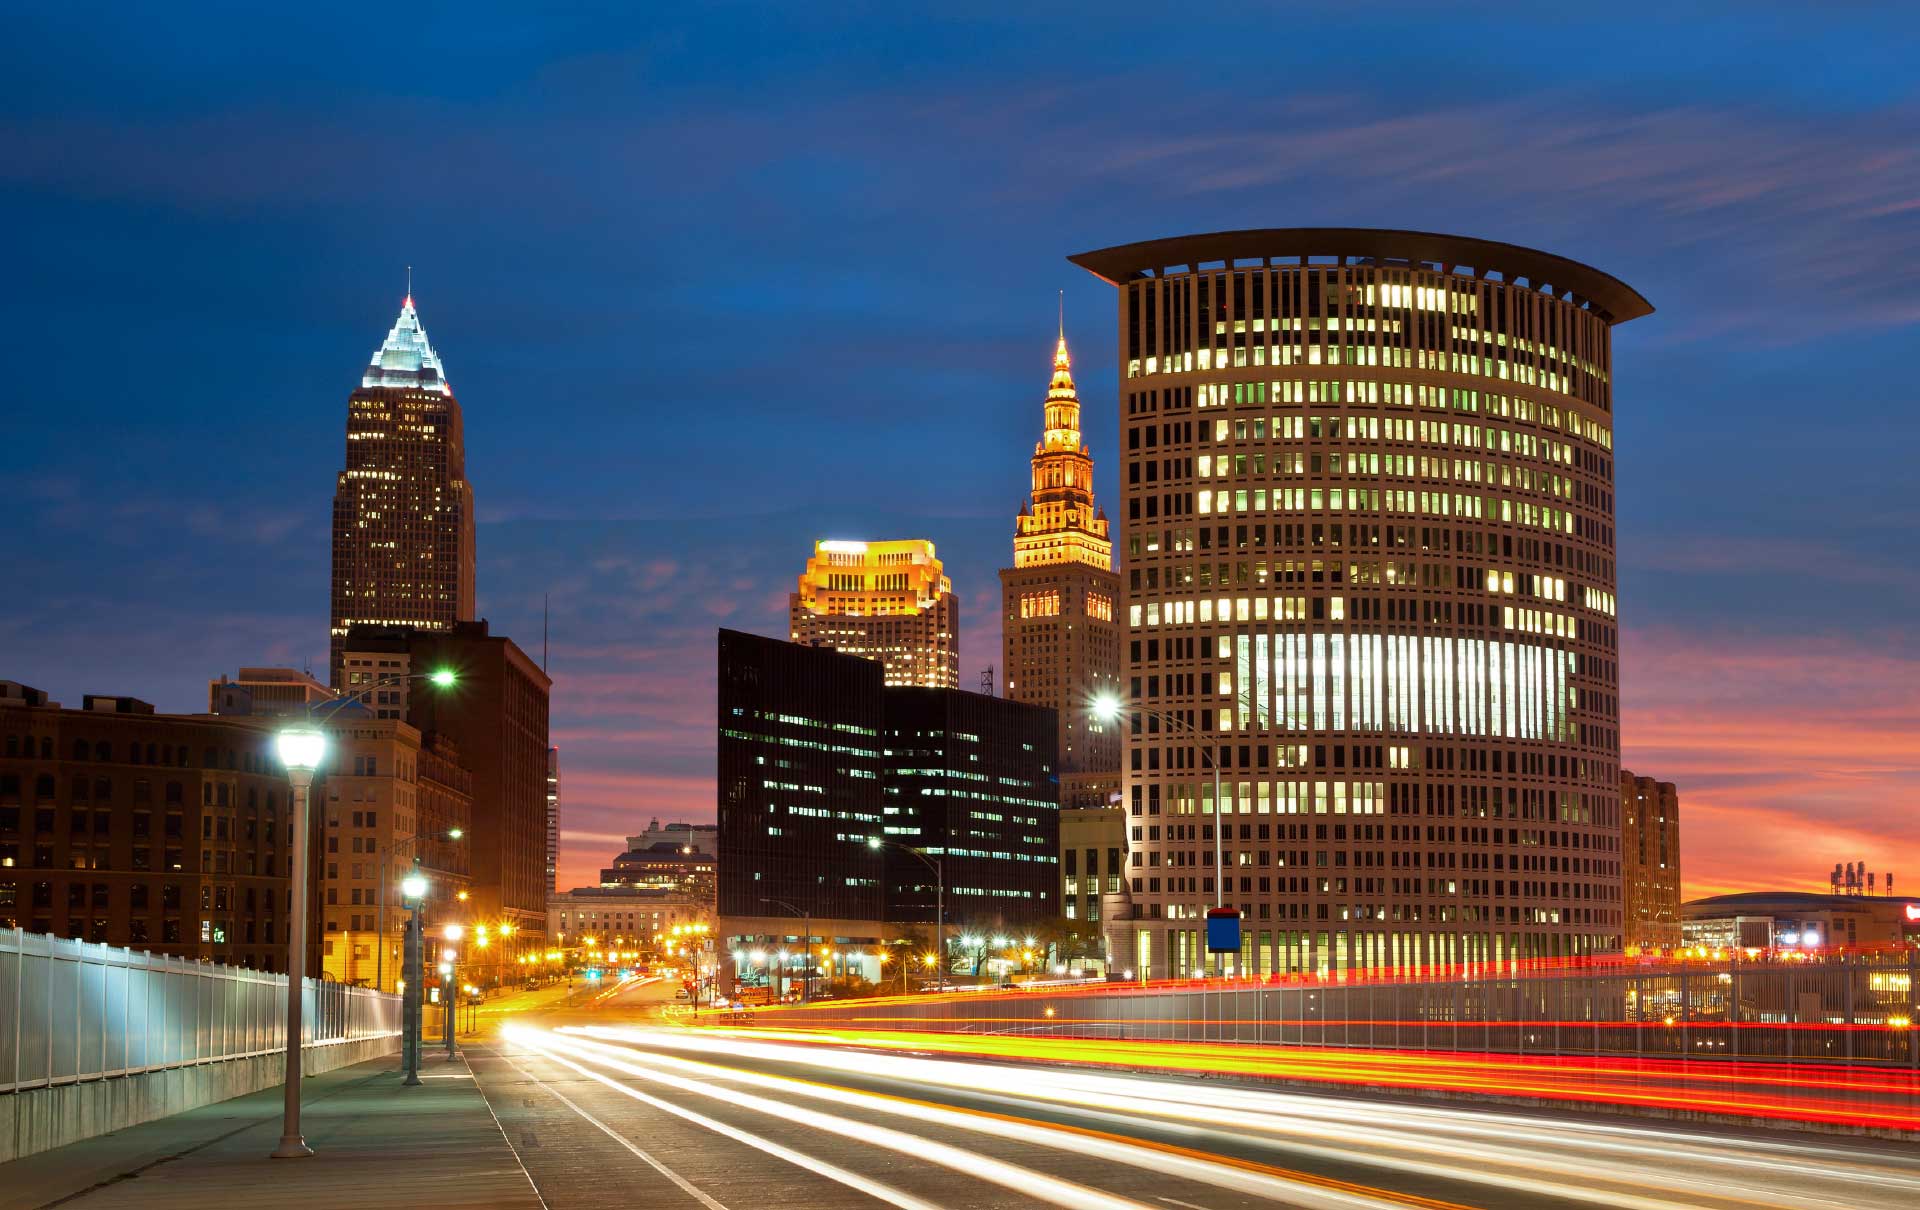 The city of Cleveland skyline at night, with the Terminal Tower and Key Building lit up.